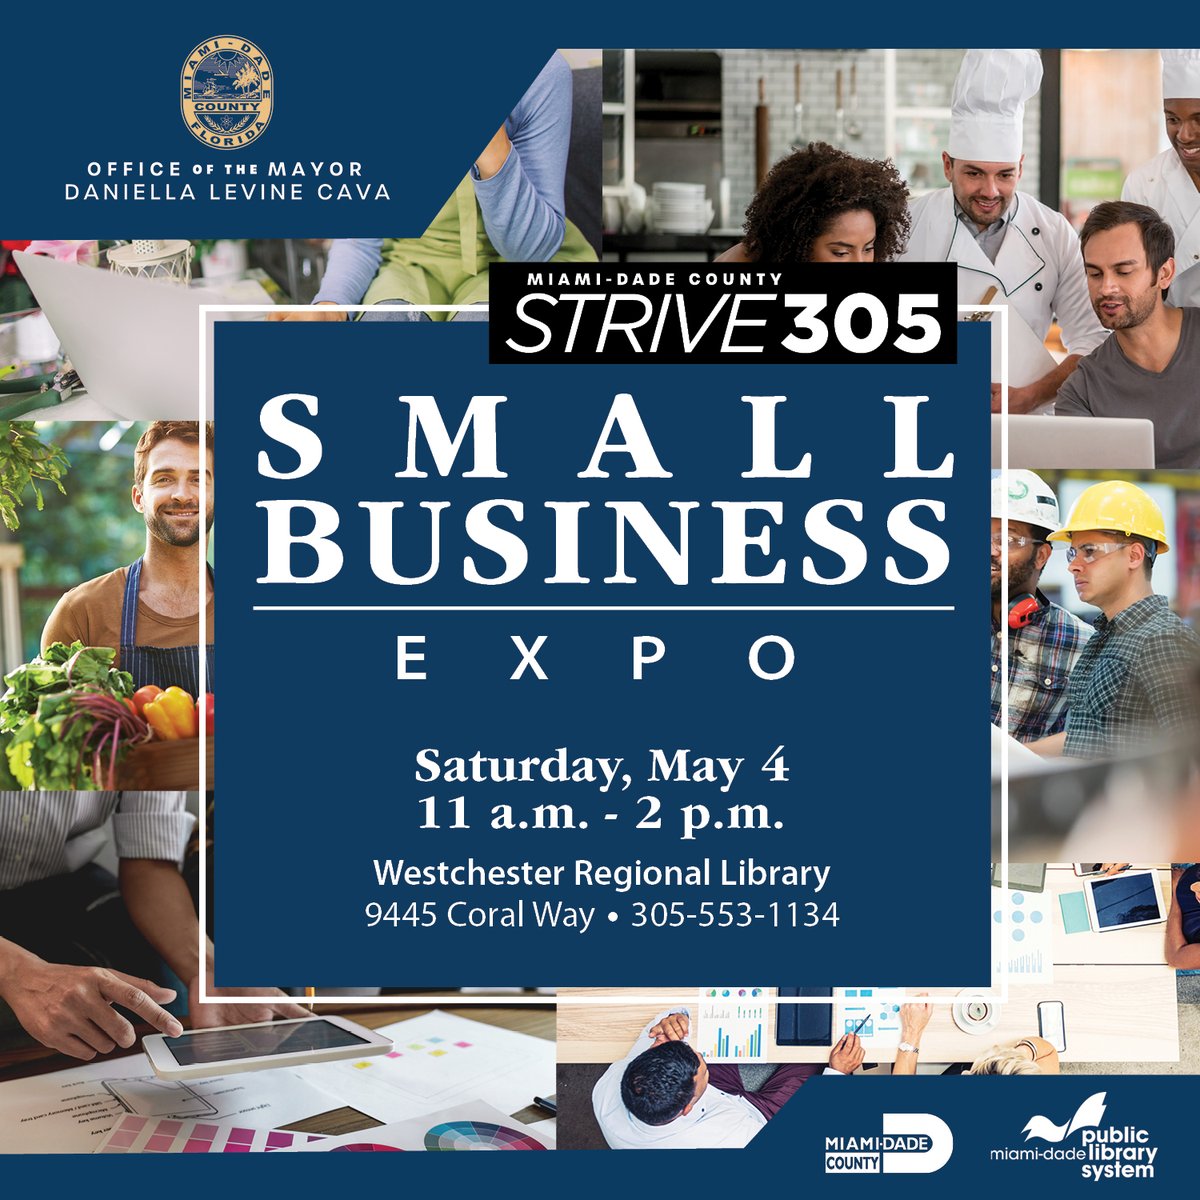 Elevate your small business game and join the Small Business Expo on May 4, from 11 a.m. to 3 p.m. at Westchester Regional Library. Connect with fellow entrepreneurs in #OurCounty, gain insight and propel your business forward. Register at spr.ly/6014bzDna